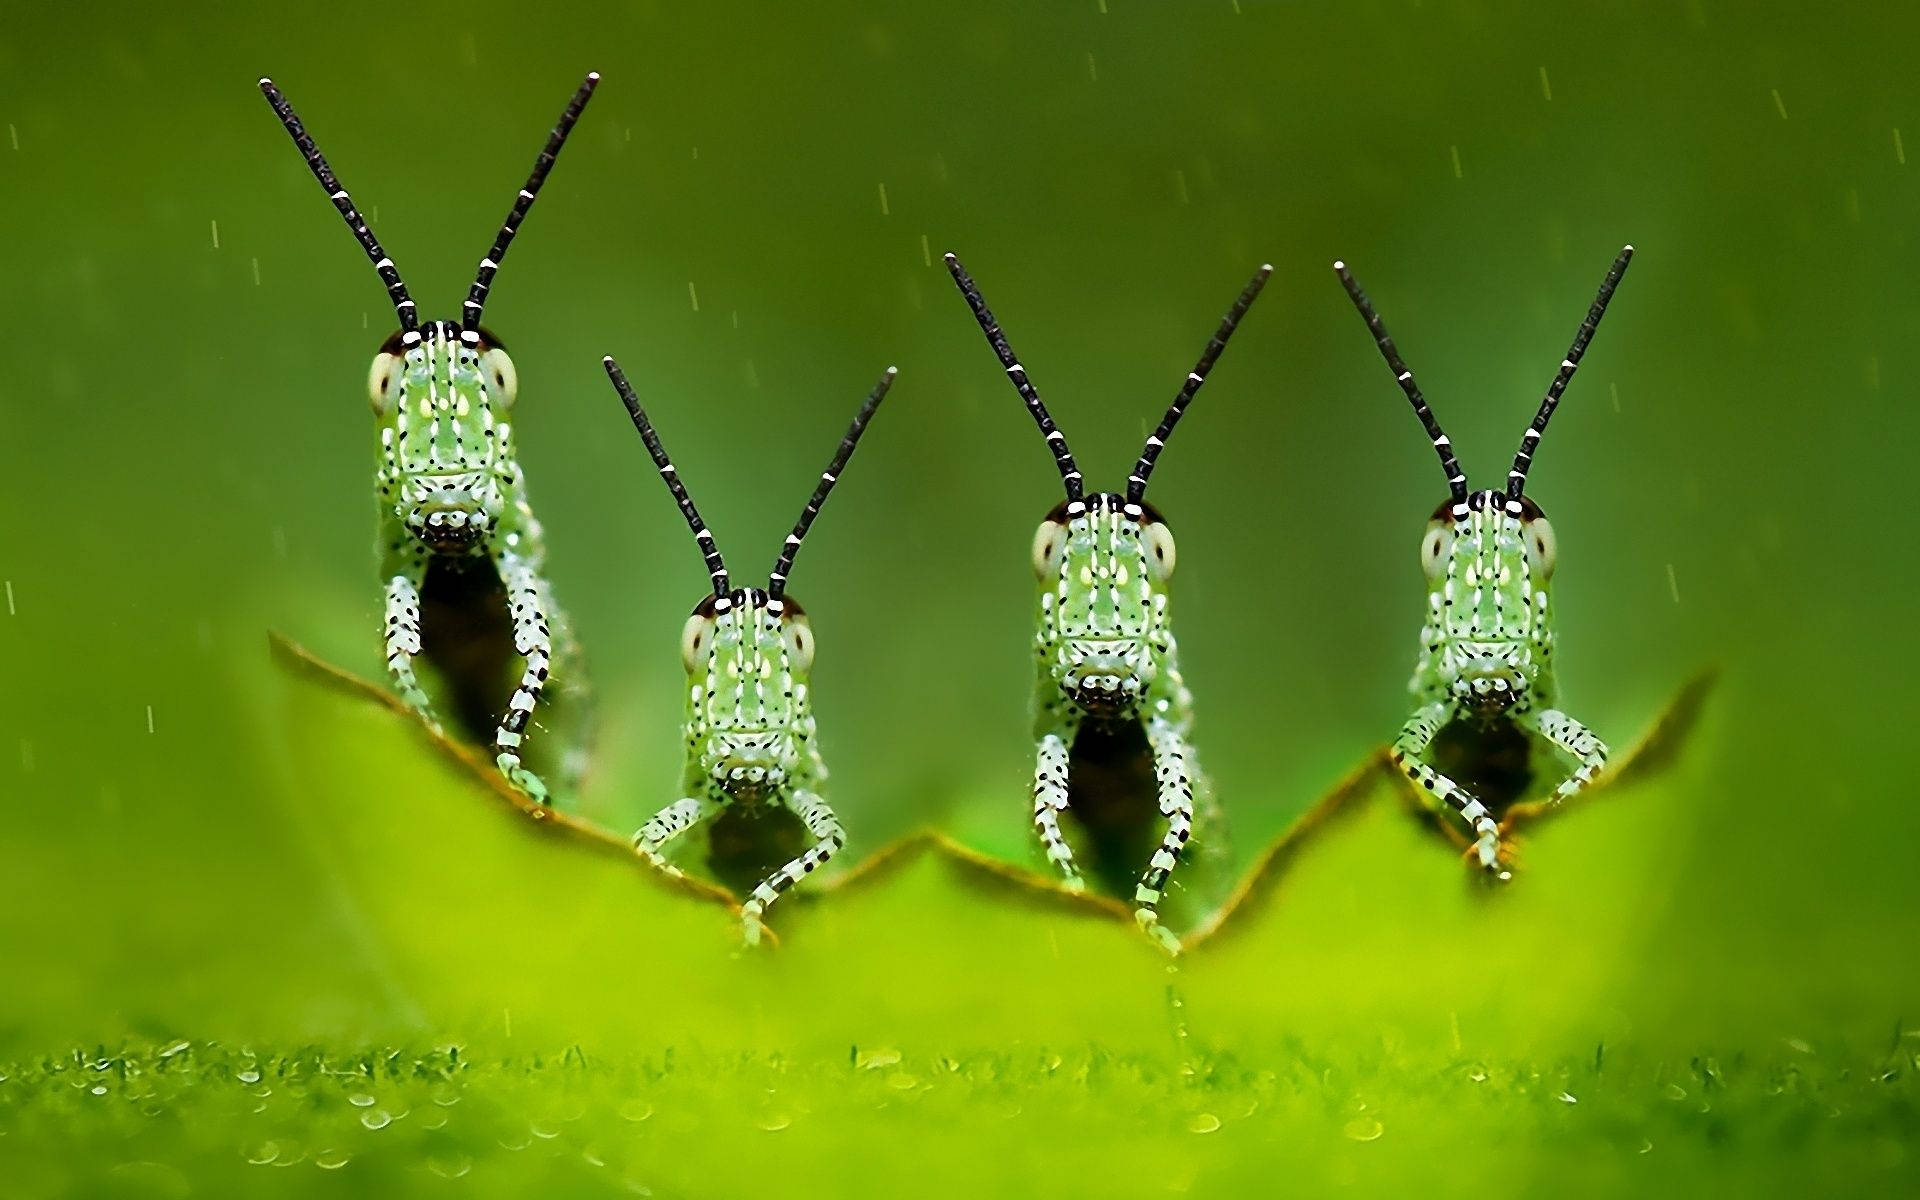 Insect Grasshoppers Feeding On Leaf Wallpaper